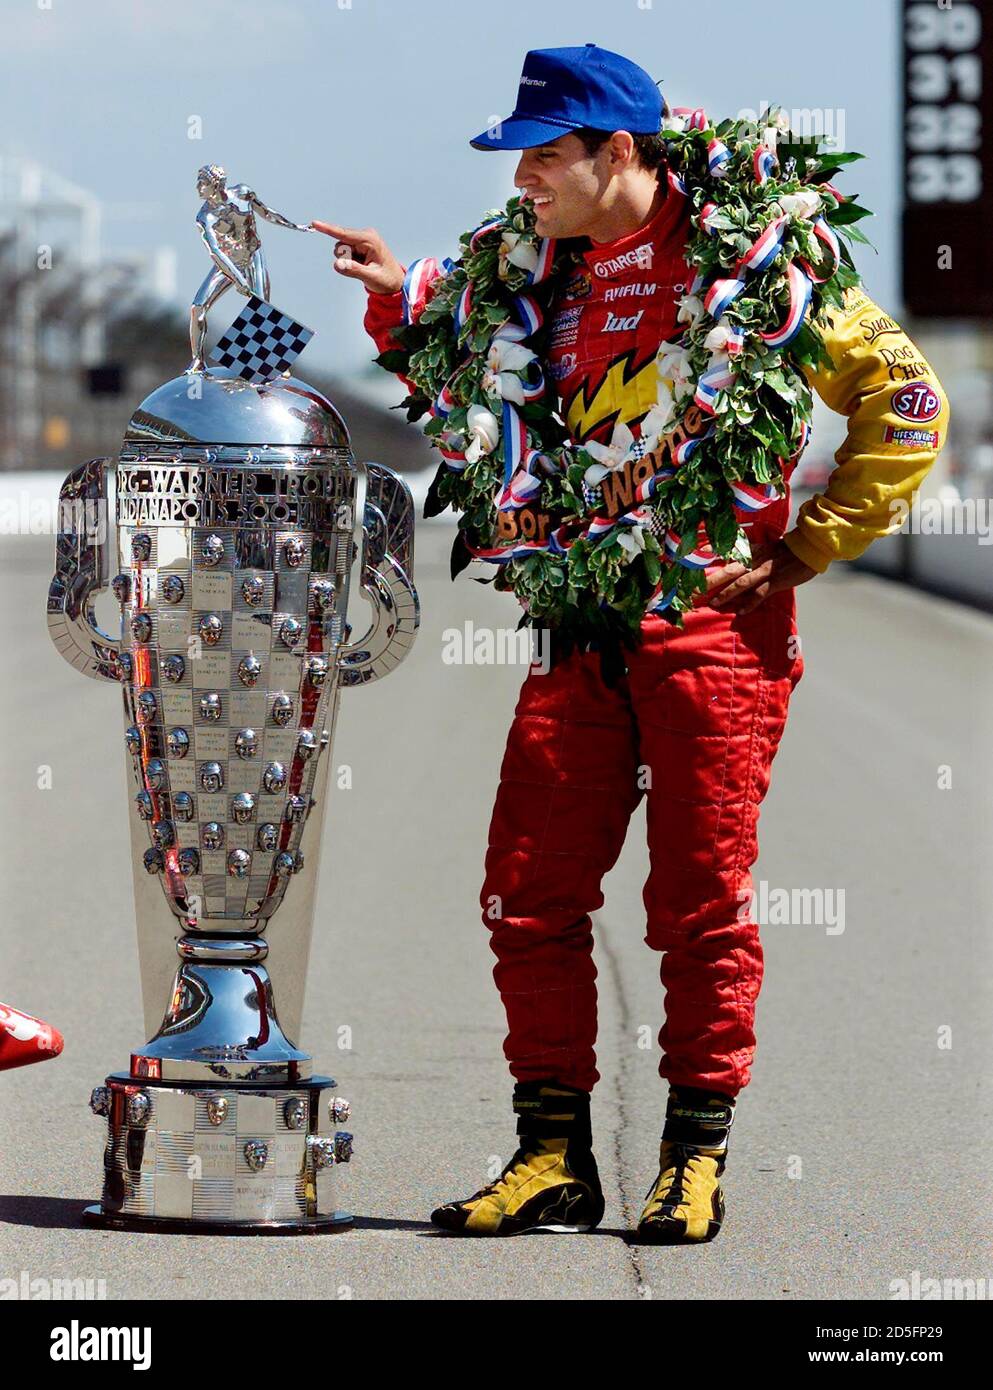 Indianapolis 500 winner Juan Montoya from Colombia stands next to the  Borg-Warner trophy during a photo session on the main straightaway at the  Indianapolis Motor Speedway May 29. Montoya won the 84th